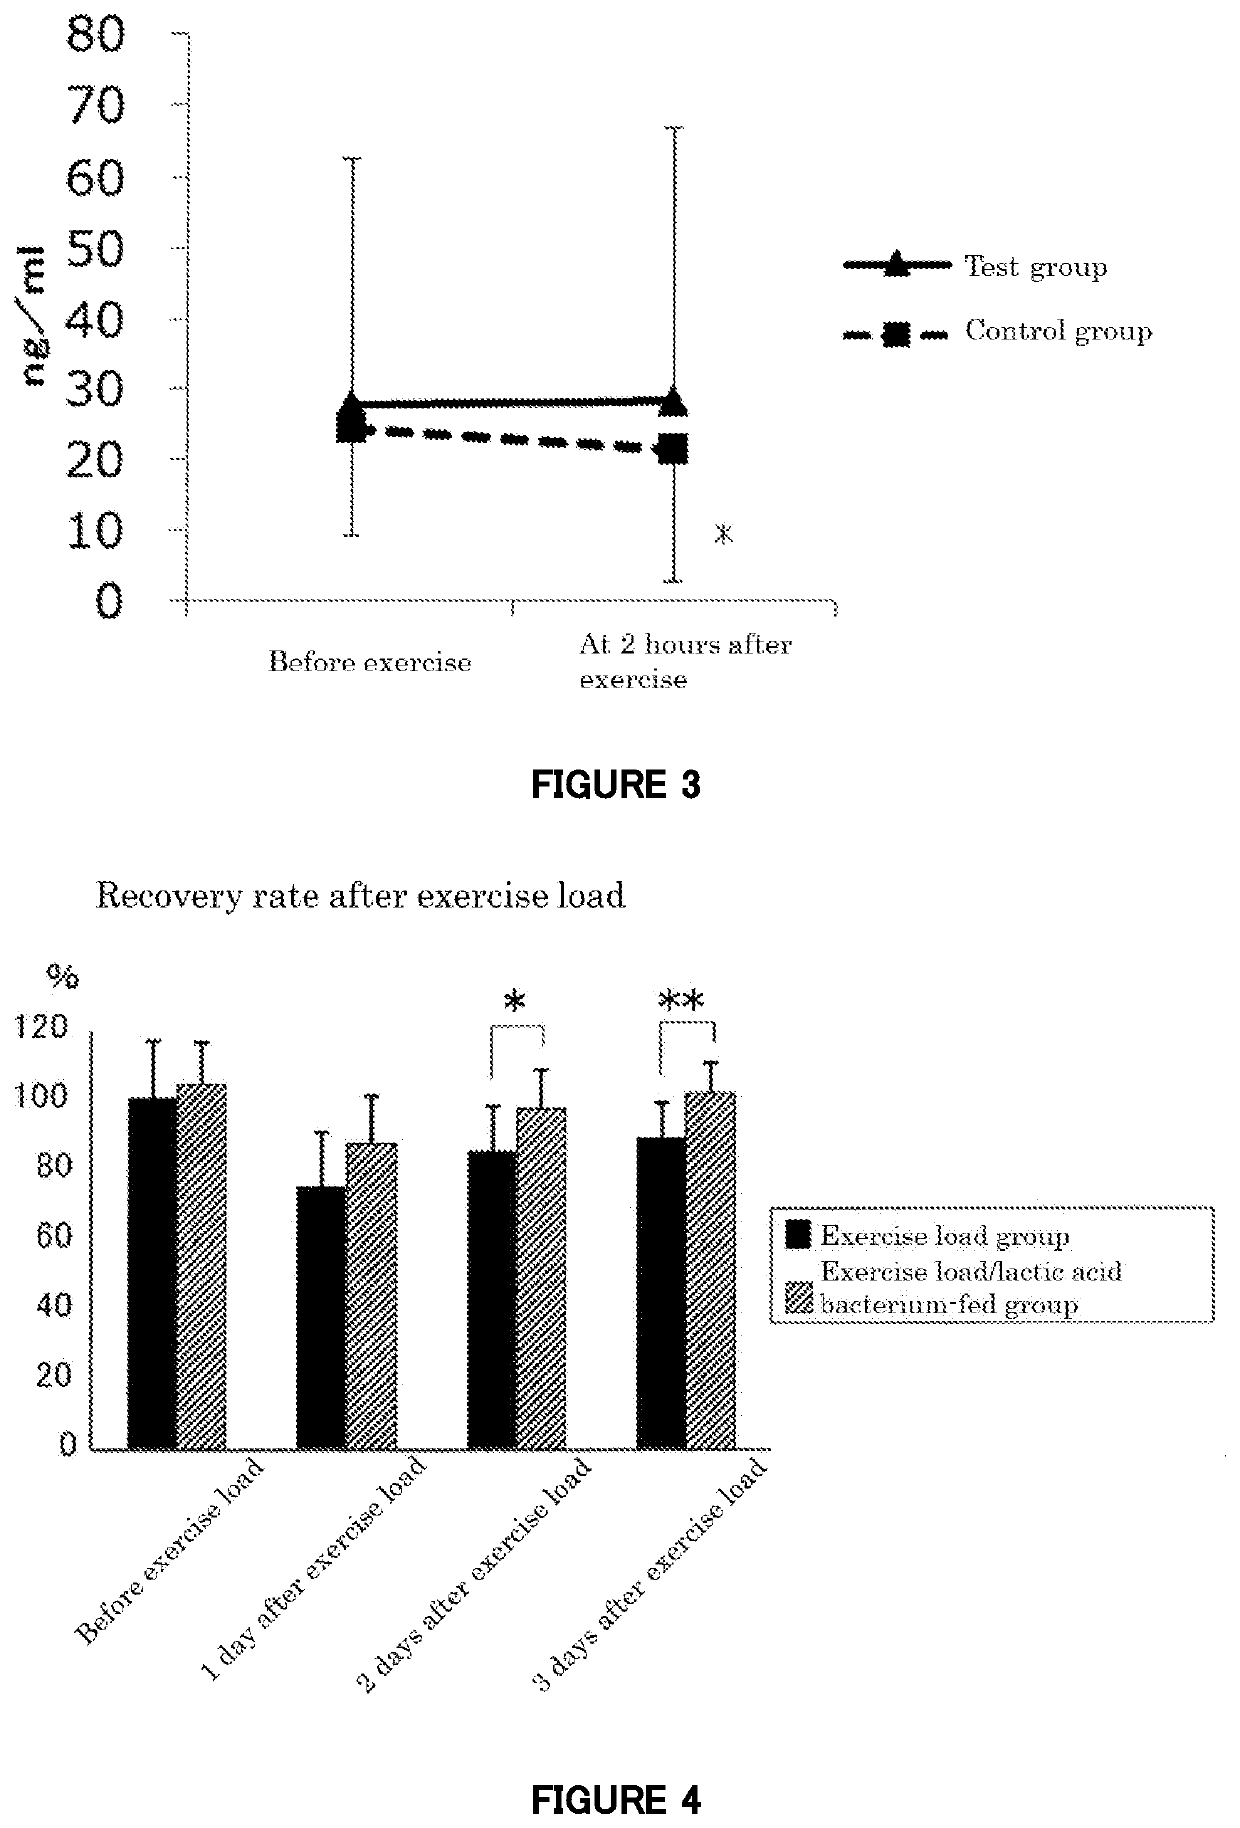 Composition for recovering from fatigue and/or preventing fatigue accumulation